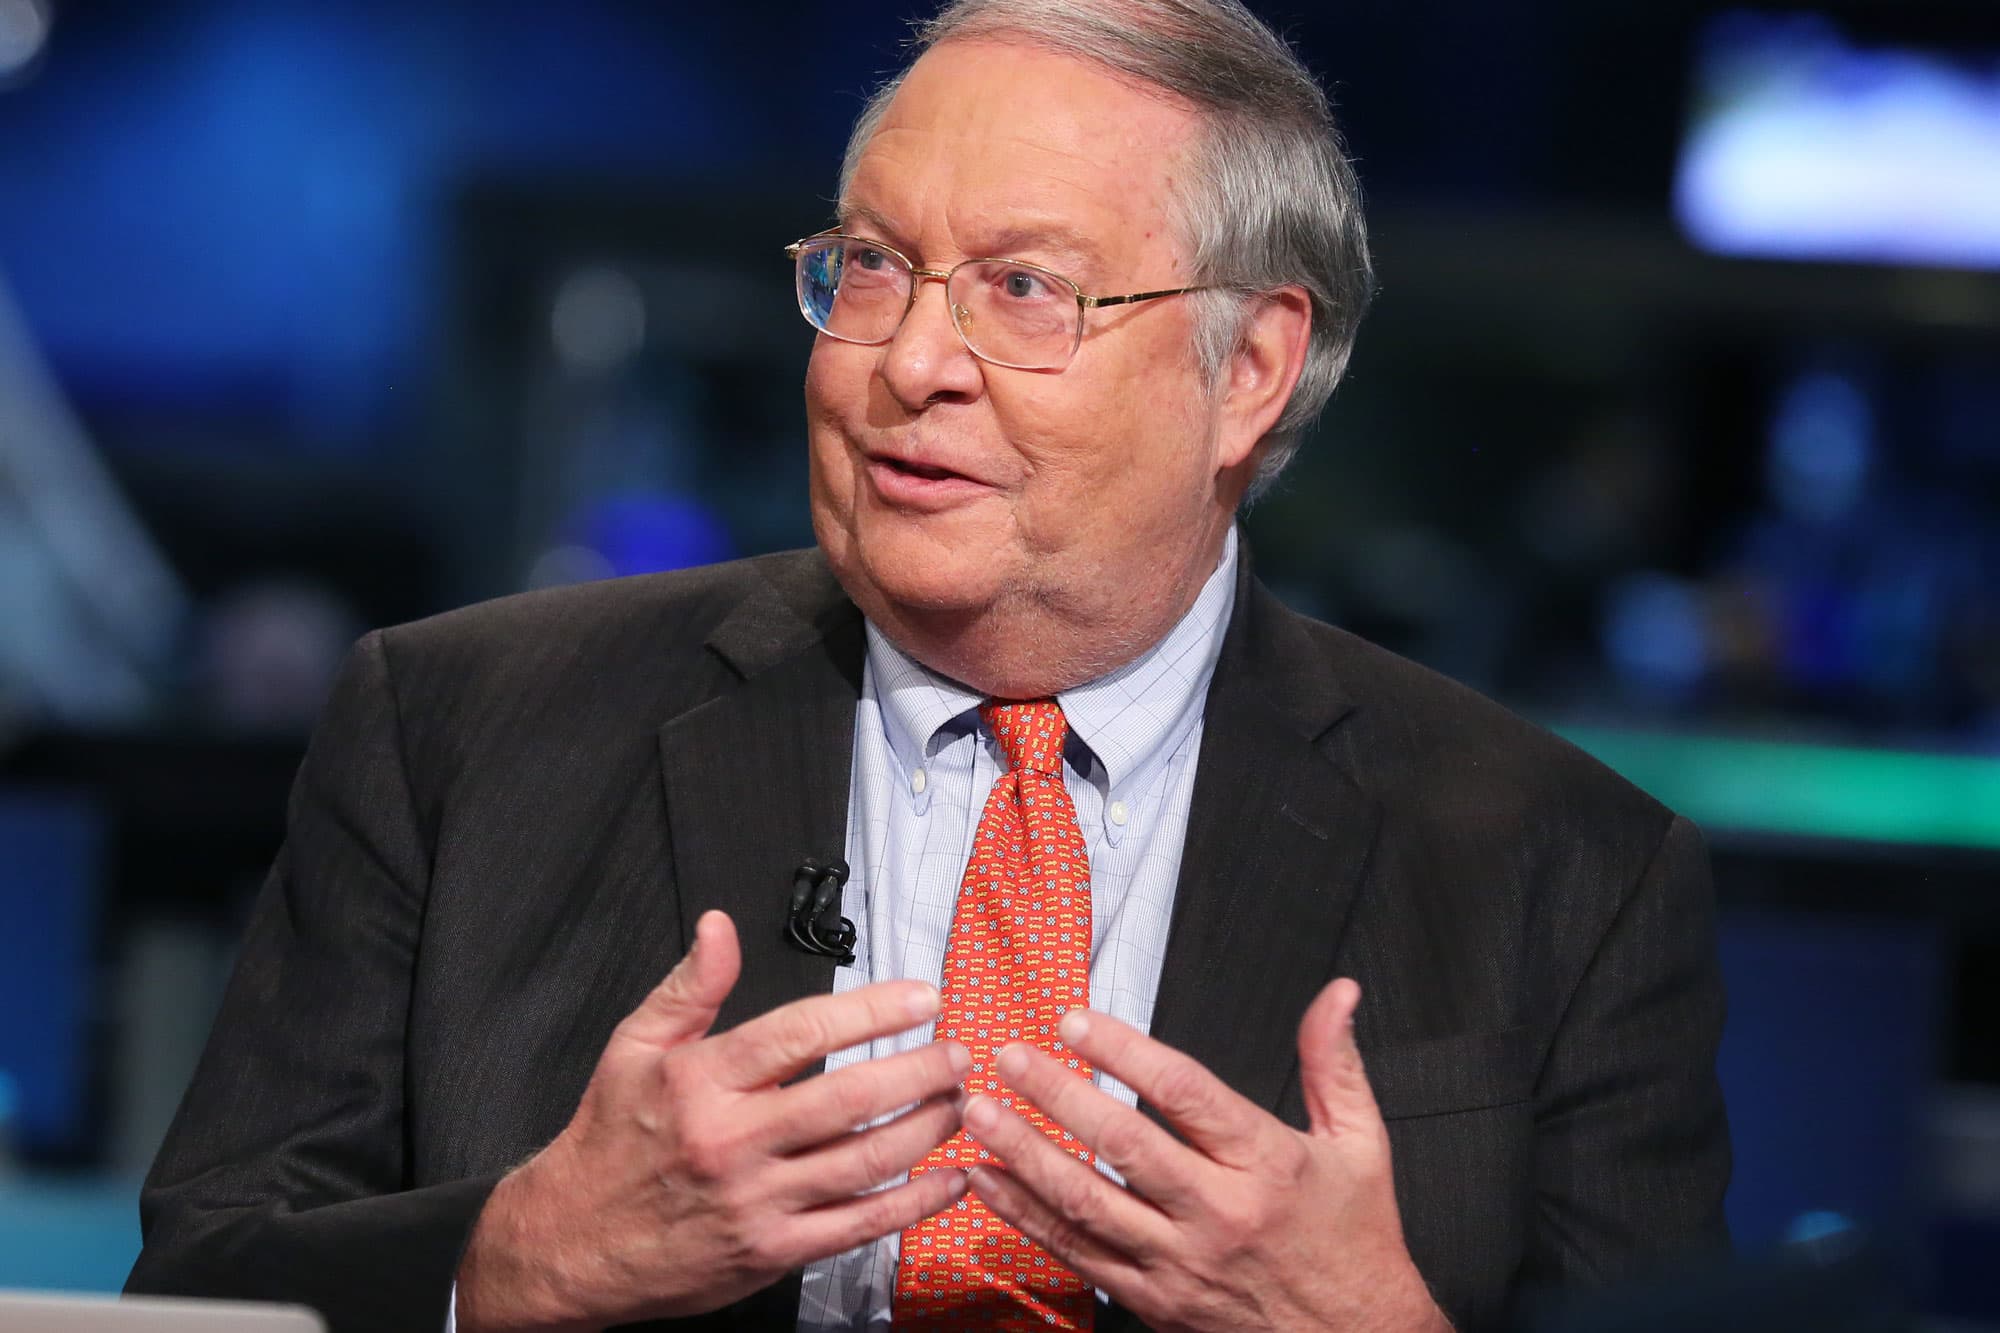 Investor Bill Miller intends to consistently climb to the top of the S&P 500 once again, but this time with new ETFs